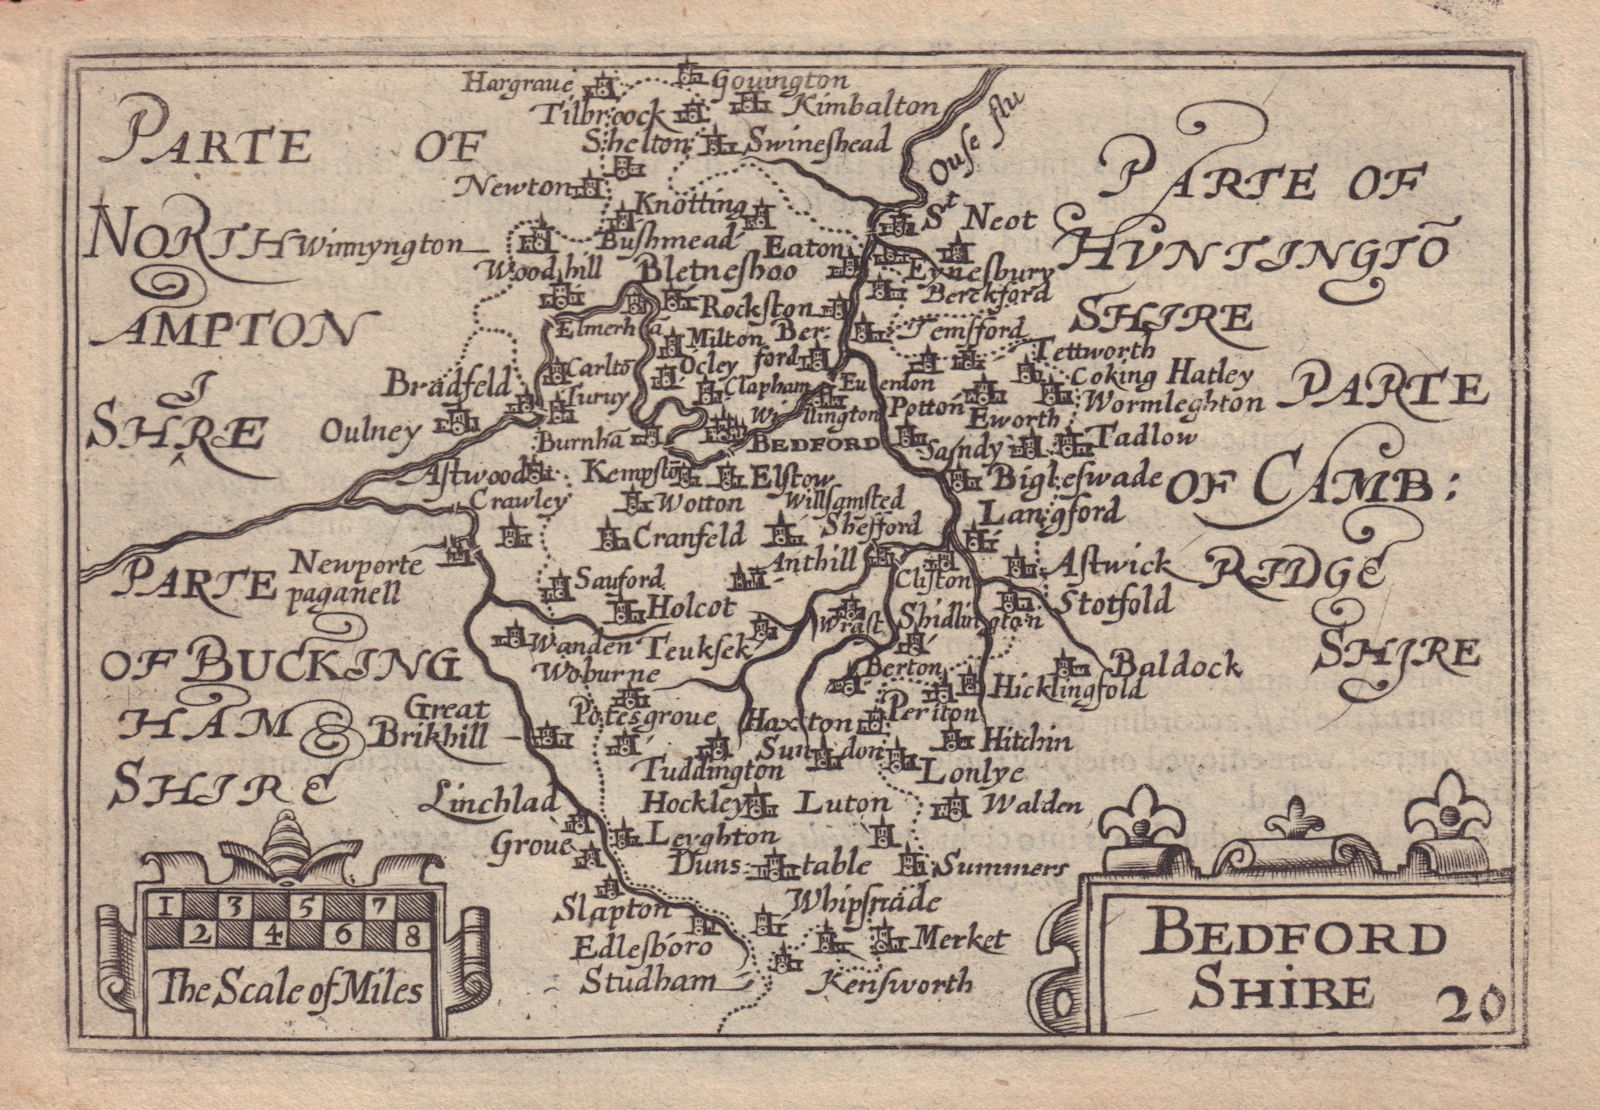 Bedford Shire by van den Keere. "Speed miniature" Bedfordshire county map 1632